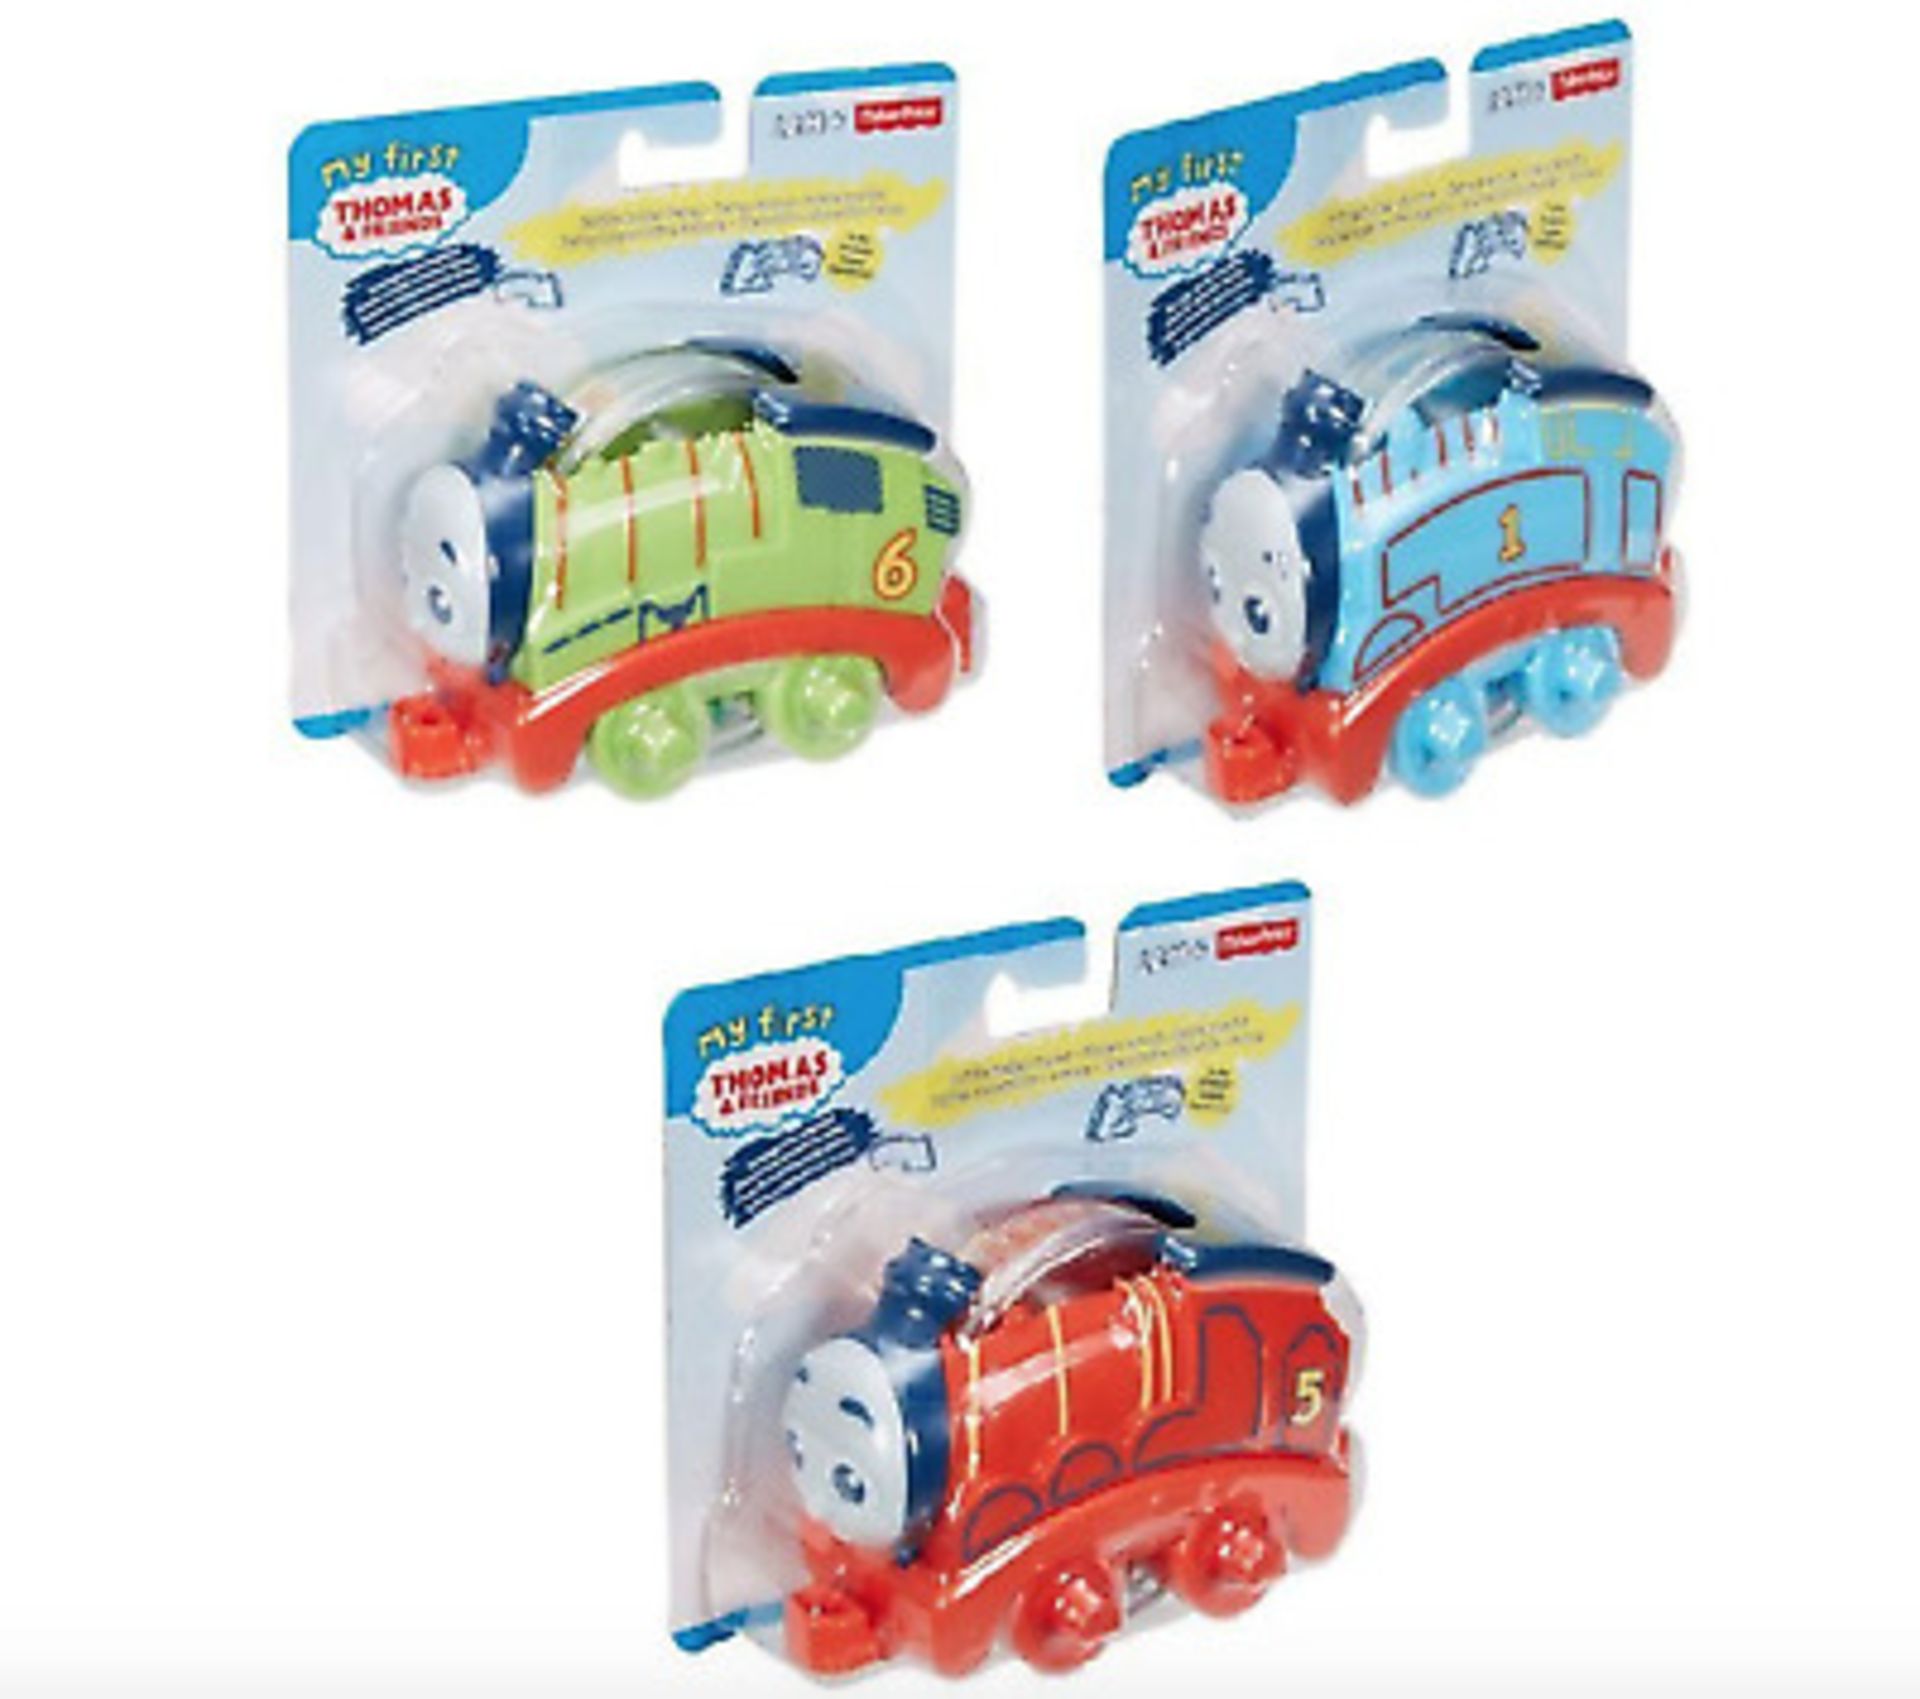 10pcs Thomas rattle roller toy - assorted colours 10pcs Thomas rattle roller toy - assorted